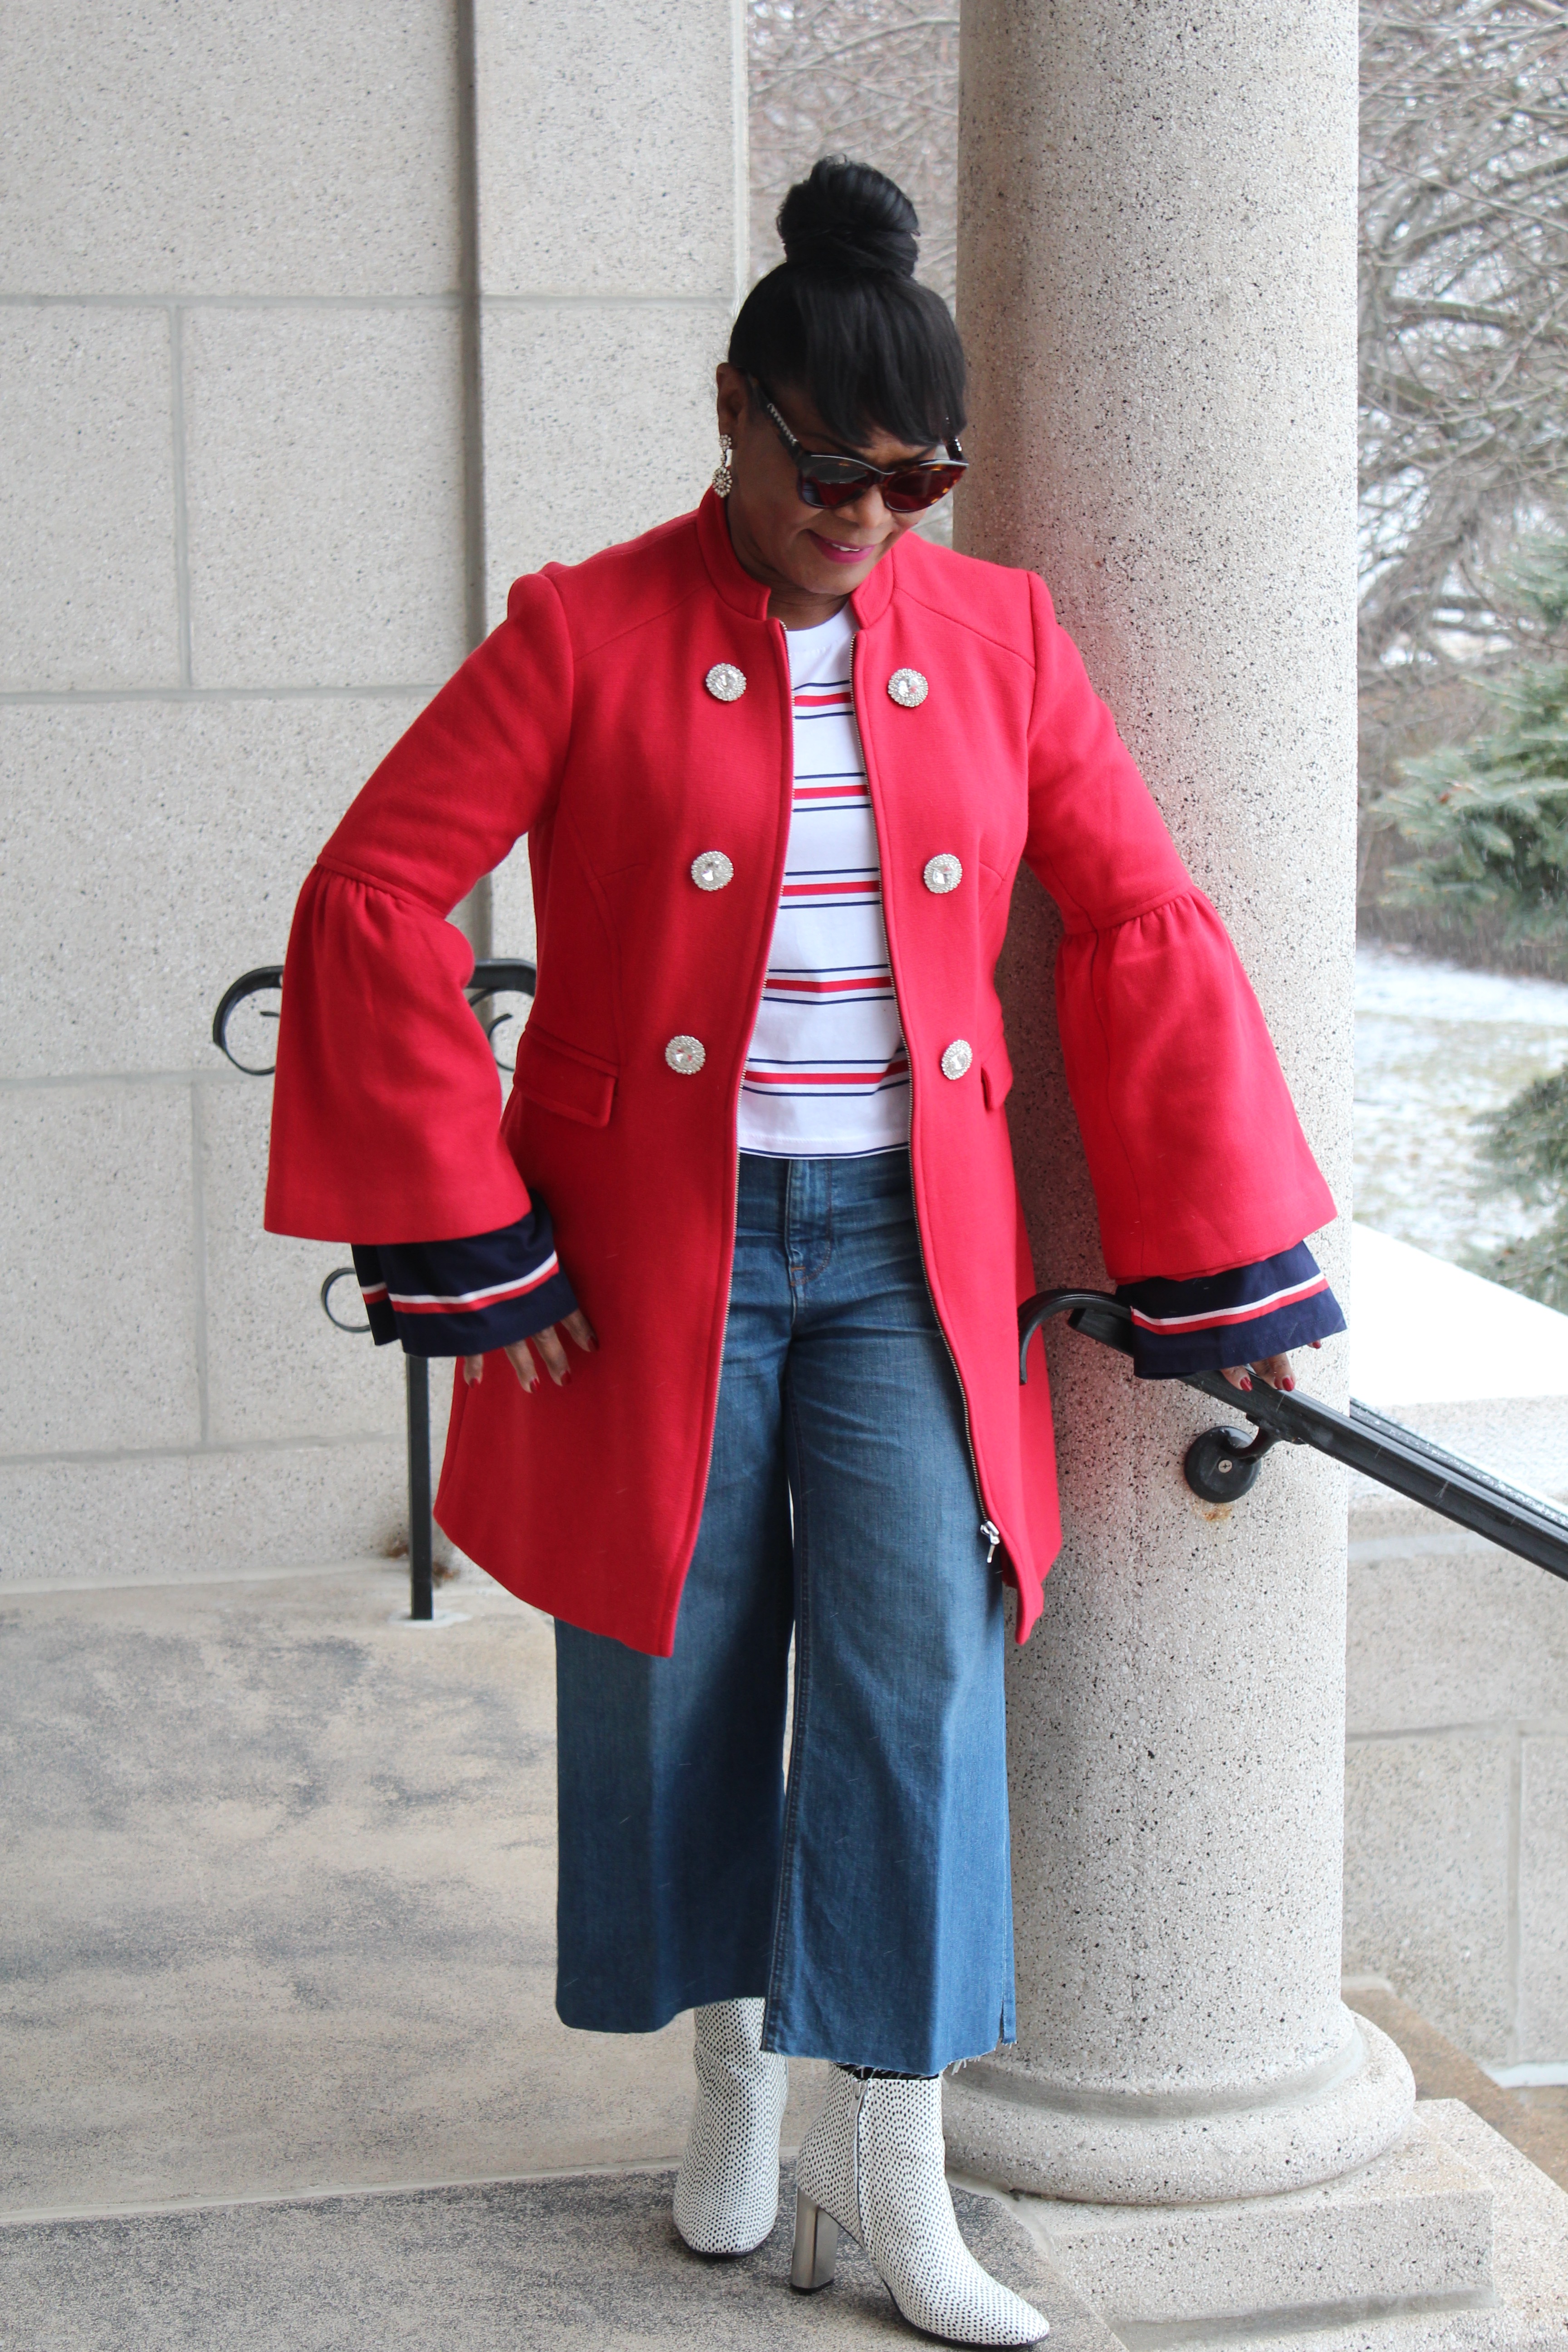 Do You Know the Health of Your Heart; INC Ponte Red Coat With Bell Sleeves; White Booties, ASOS Oversized Sleeve Top